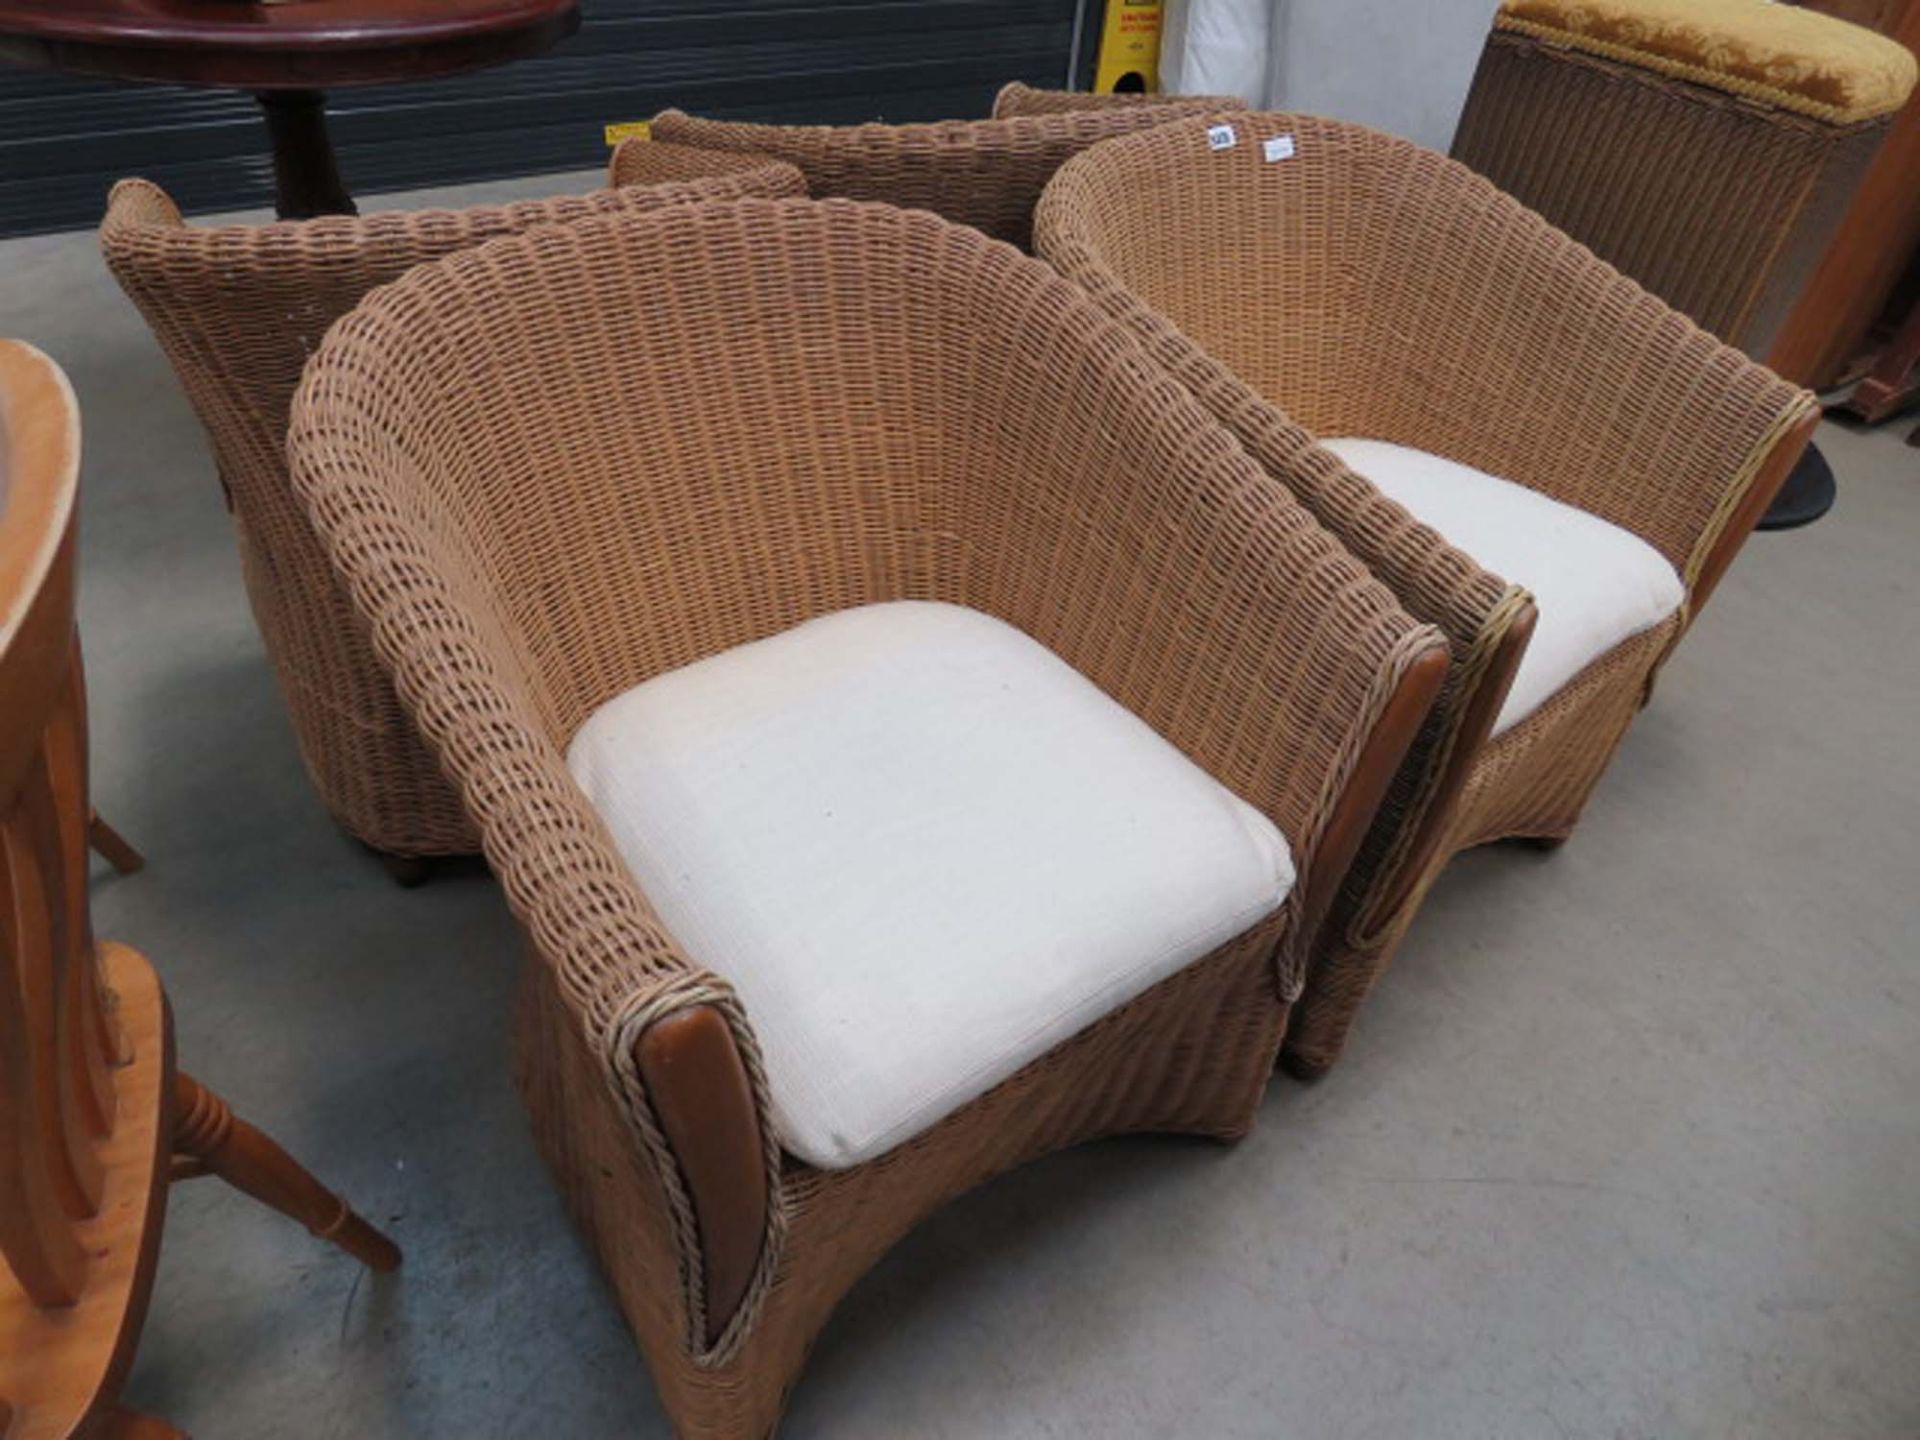 Four wicker conservatory chairs with oatmeal seats